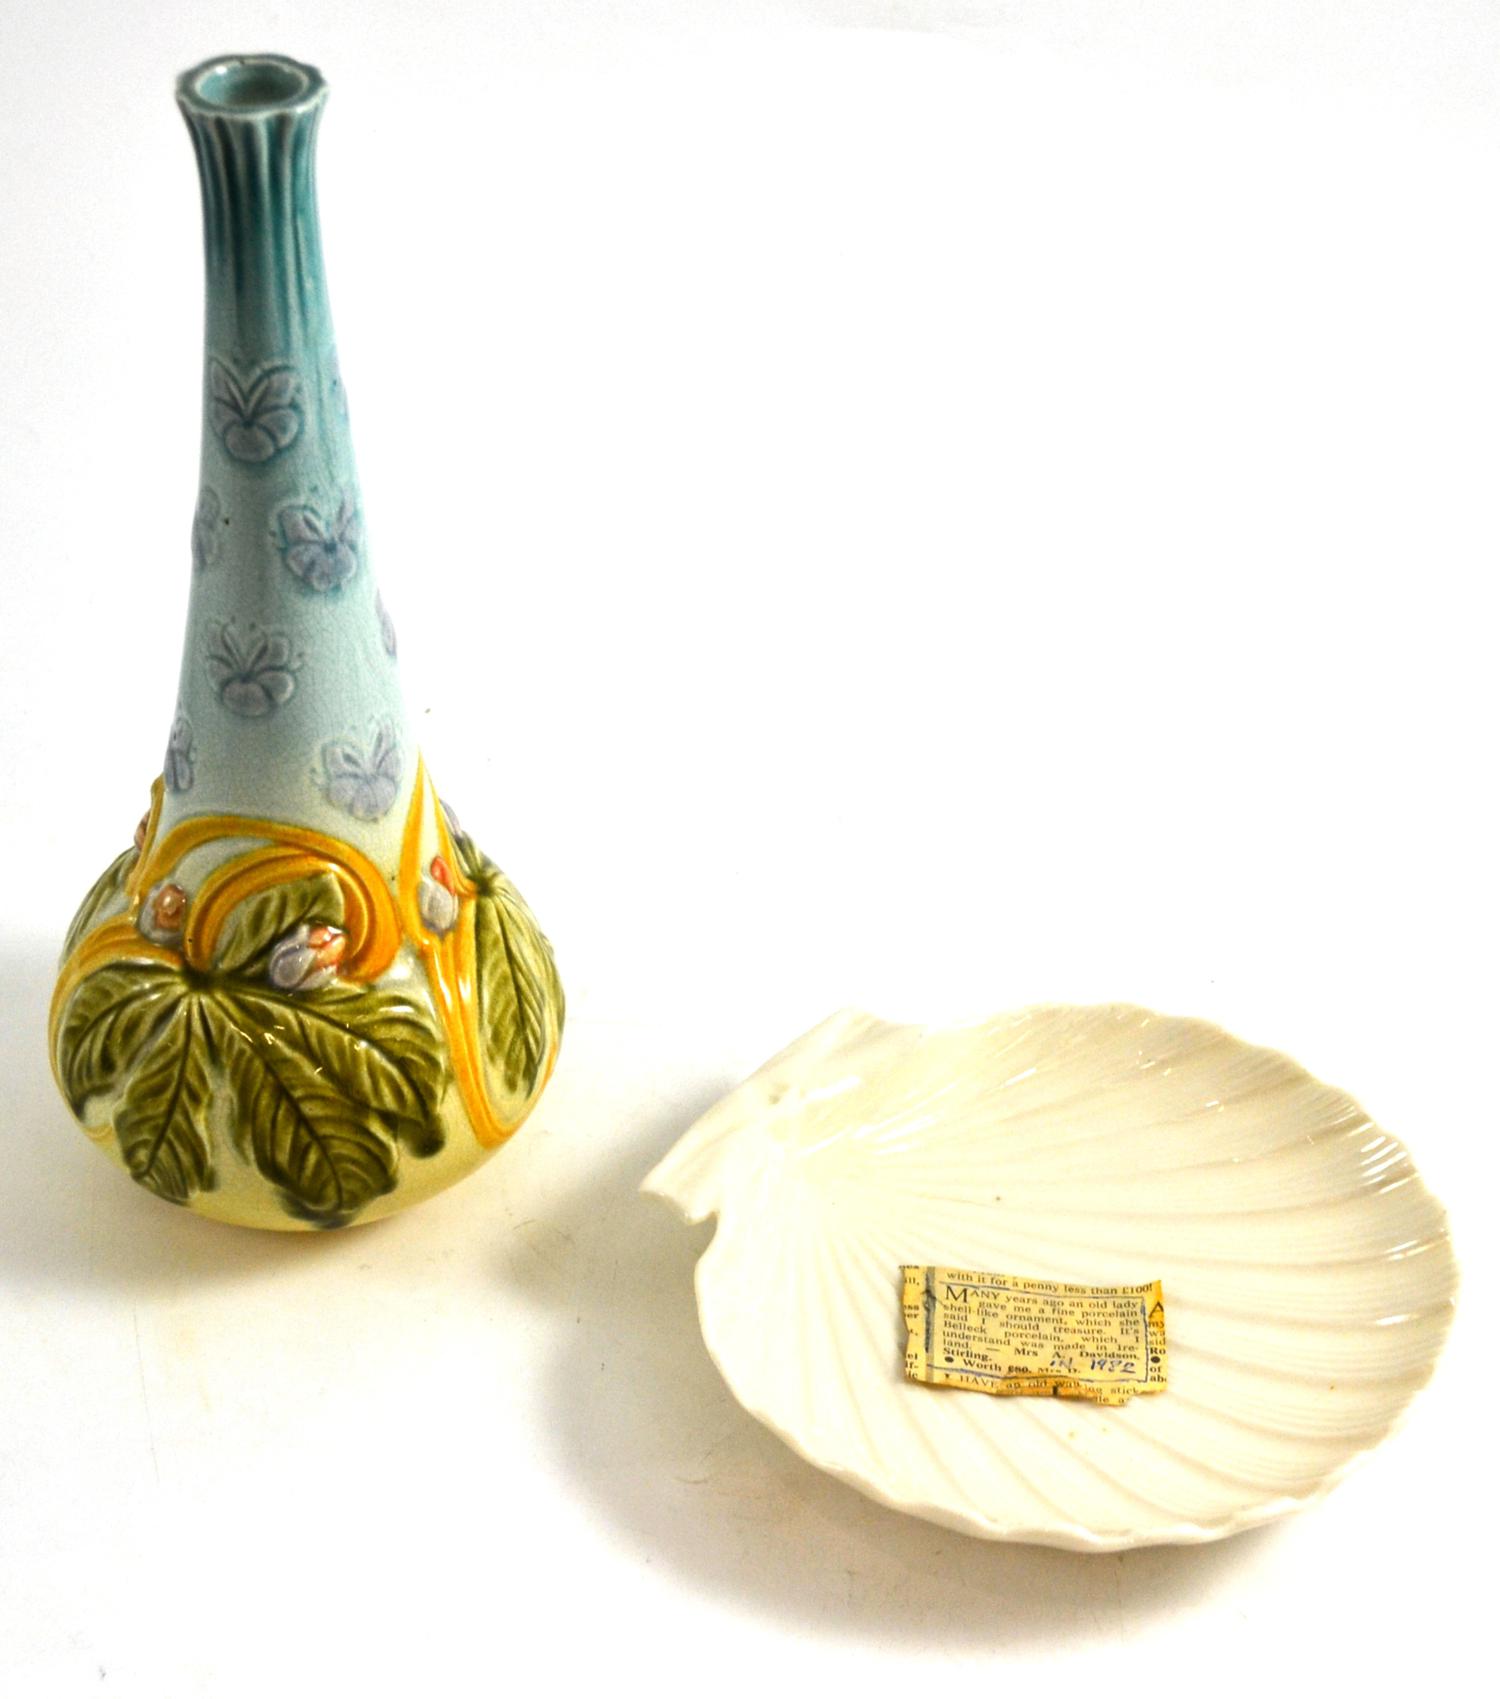 Bretby vase and a Belleek dish Shell in good condition. Vase heavily crazed